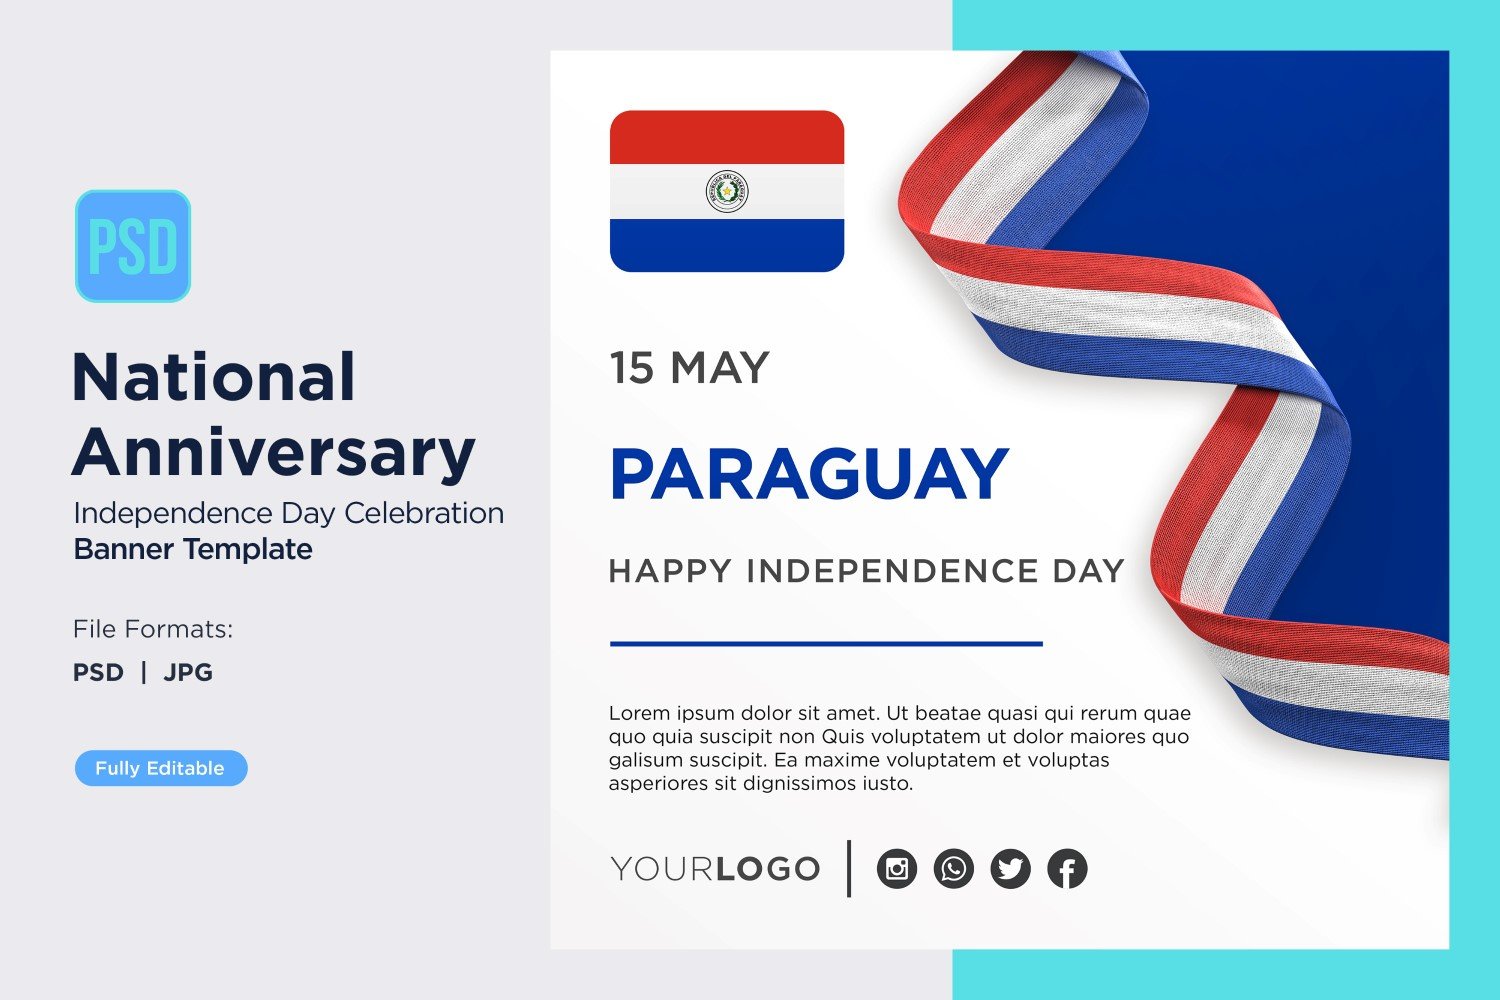 Template #402925 Day Celebration Webdesign Template - Logo template Preview